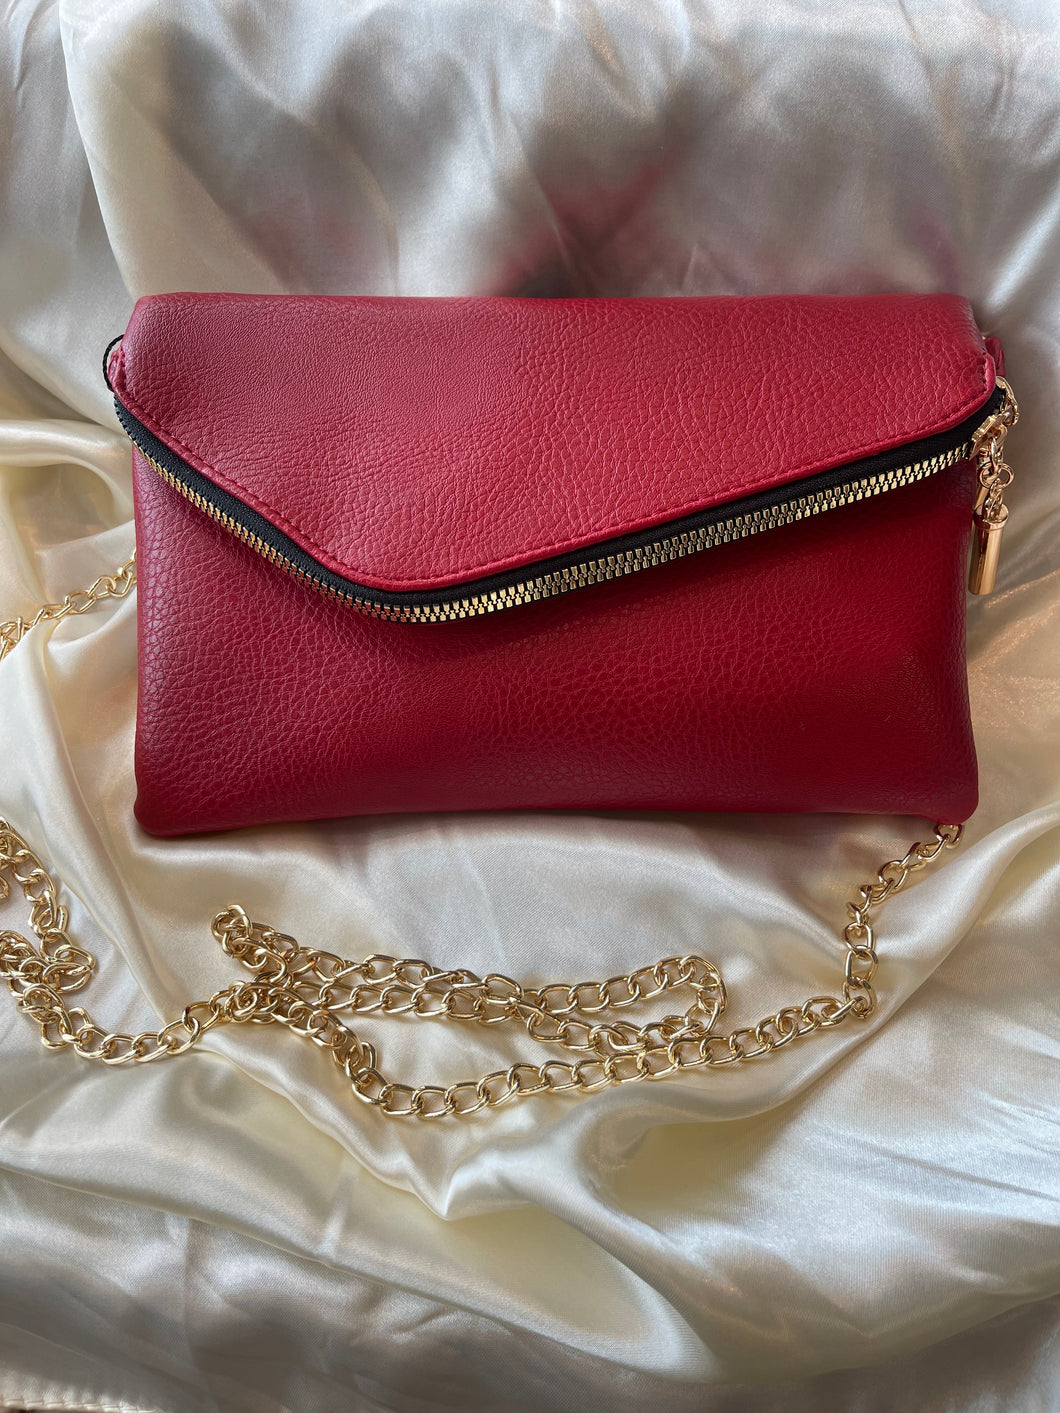 Crimson Red Flap Over Crossbody Purse with Gold Chain Strap